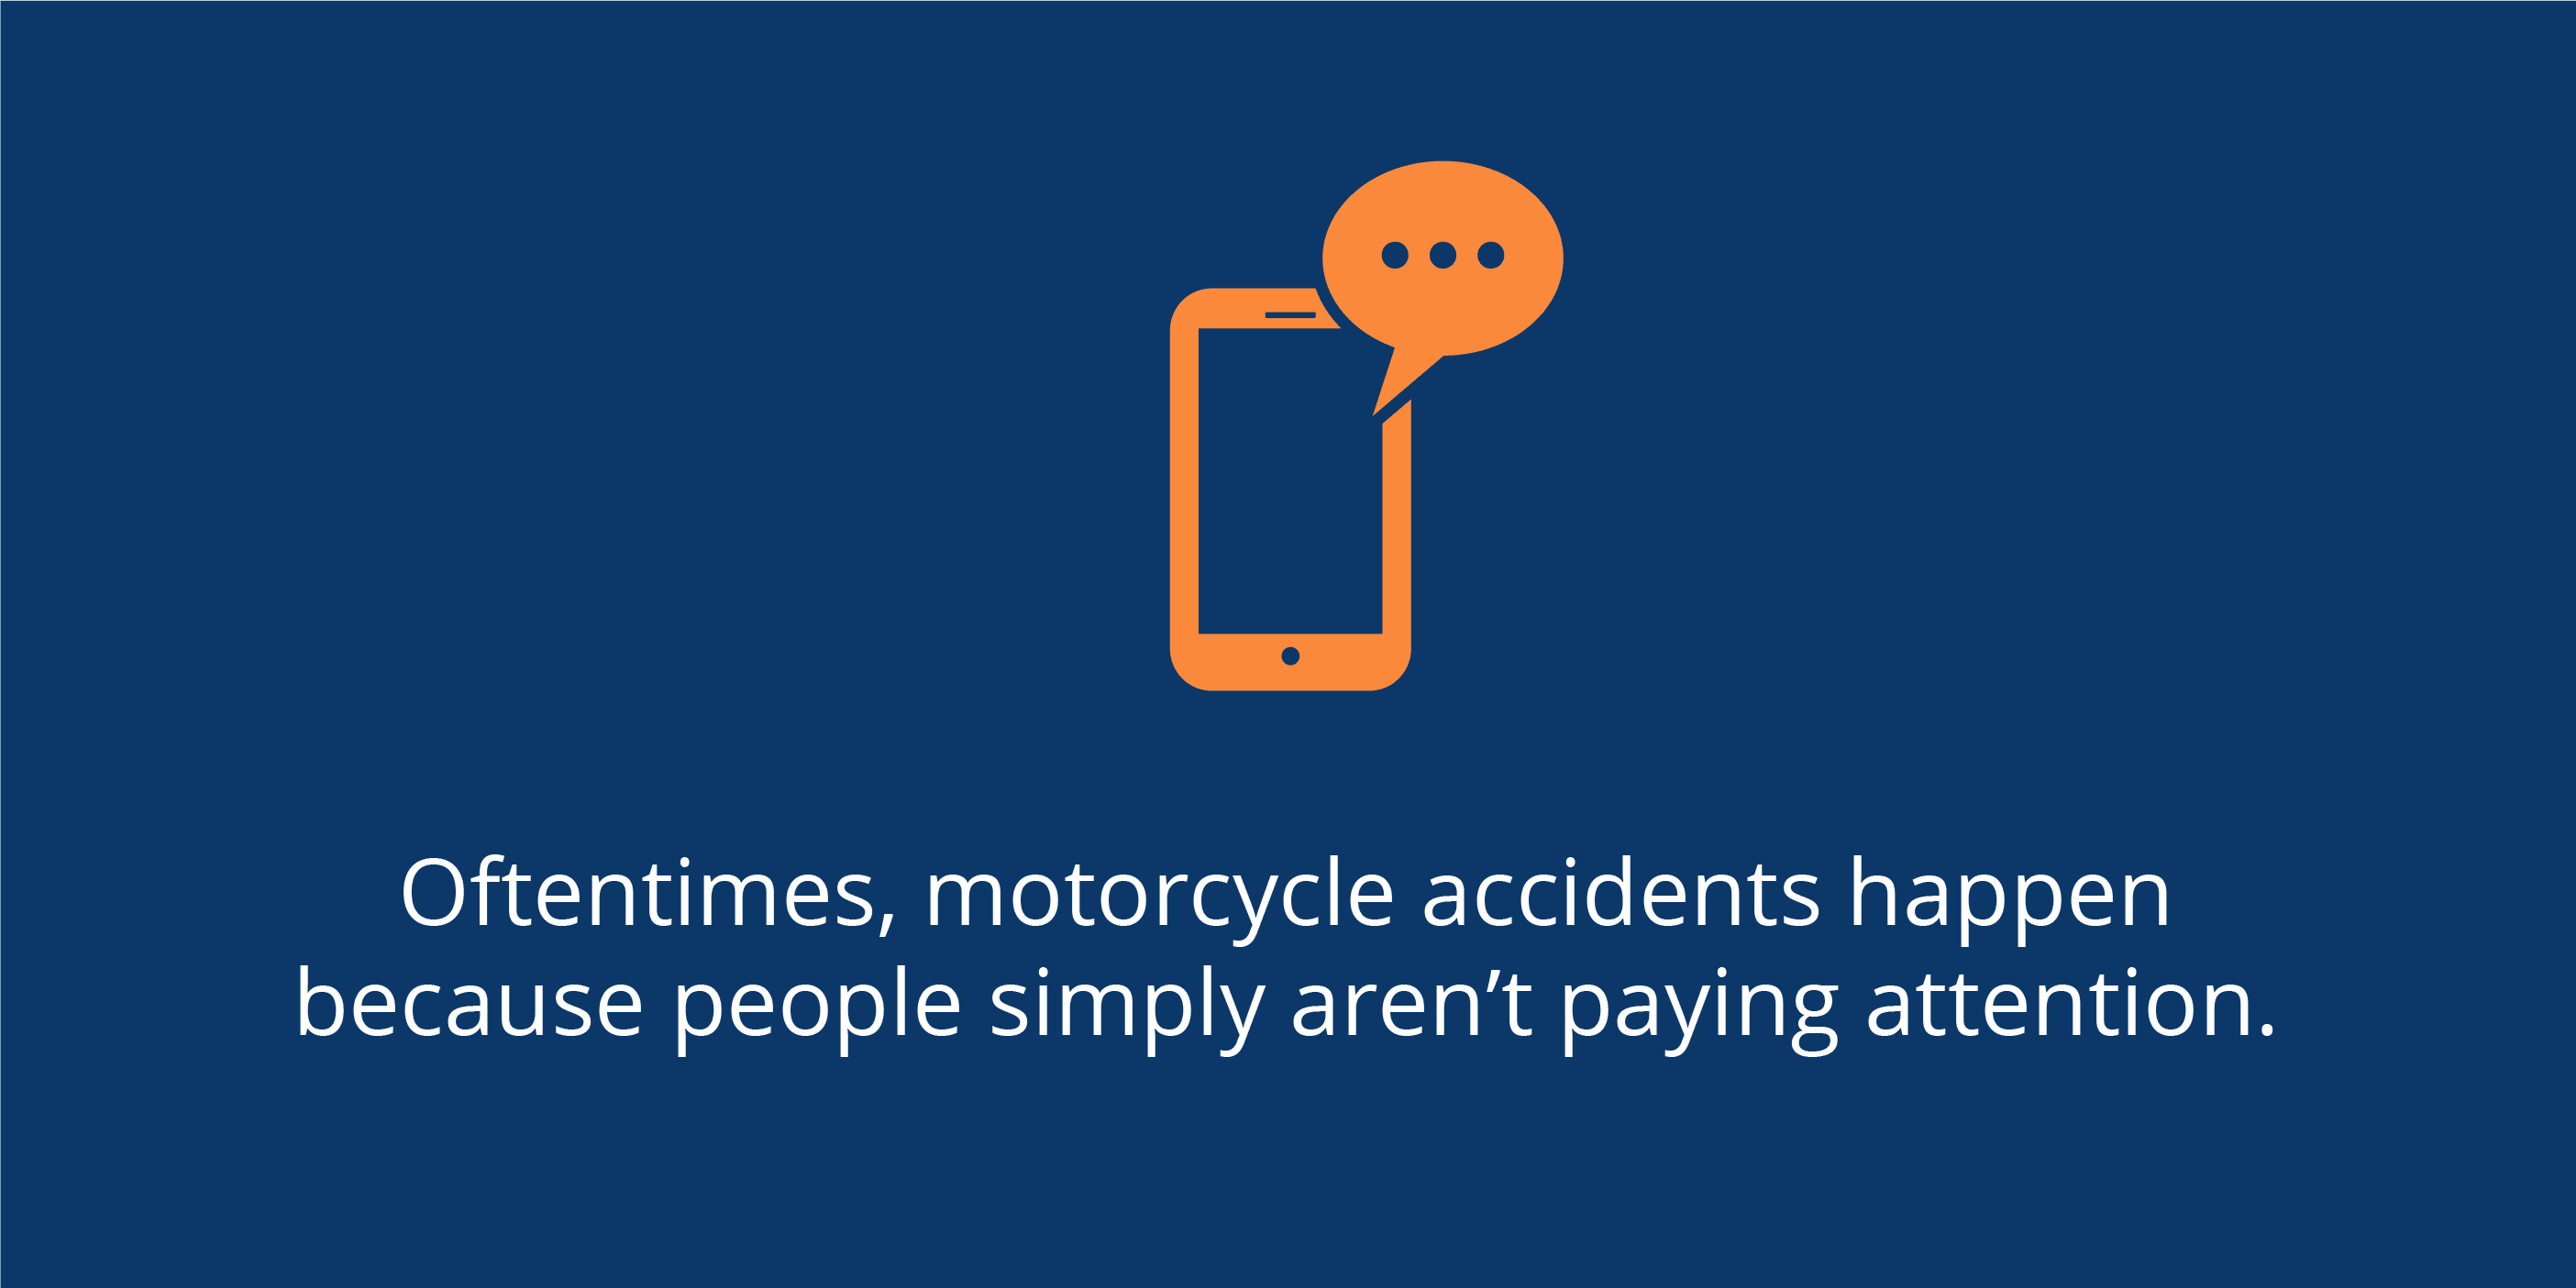 Motorcycle-accidents-happen-because-of-lack-of-attention